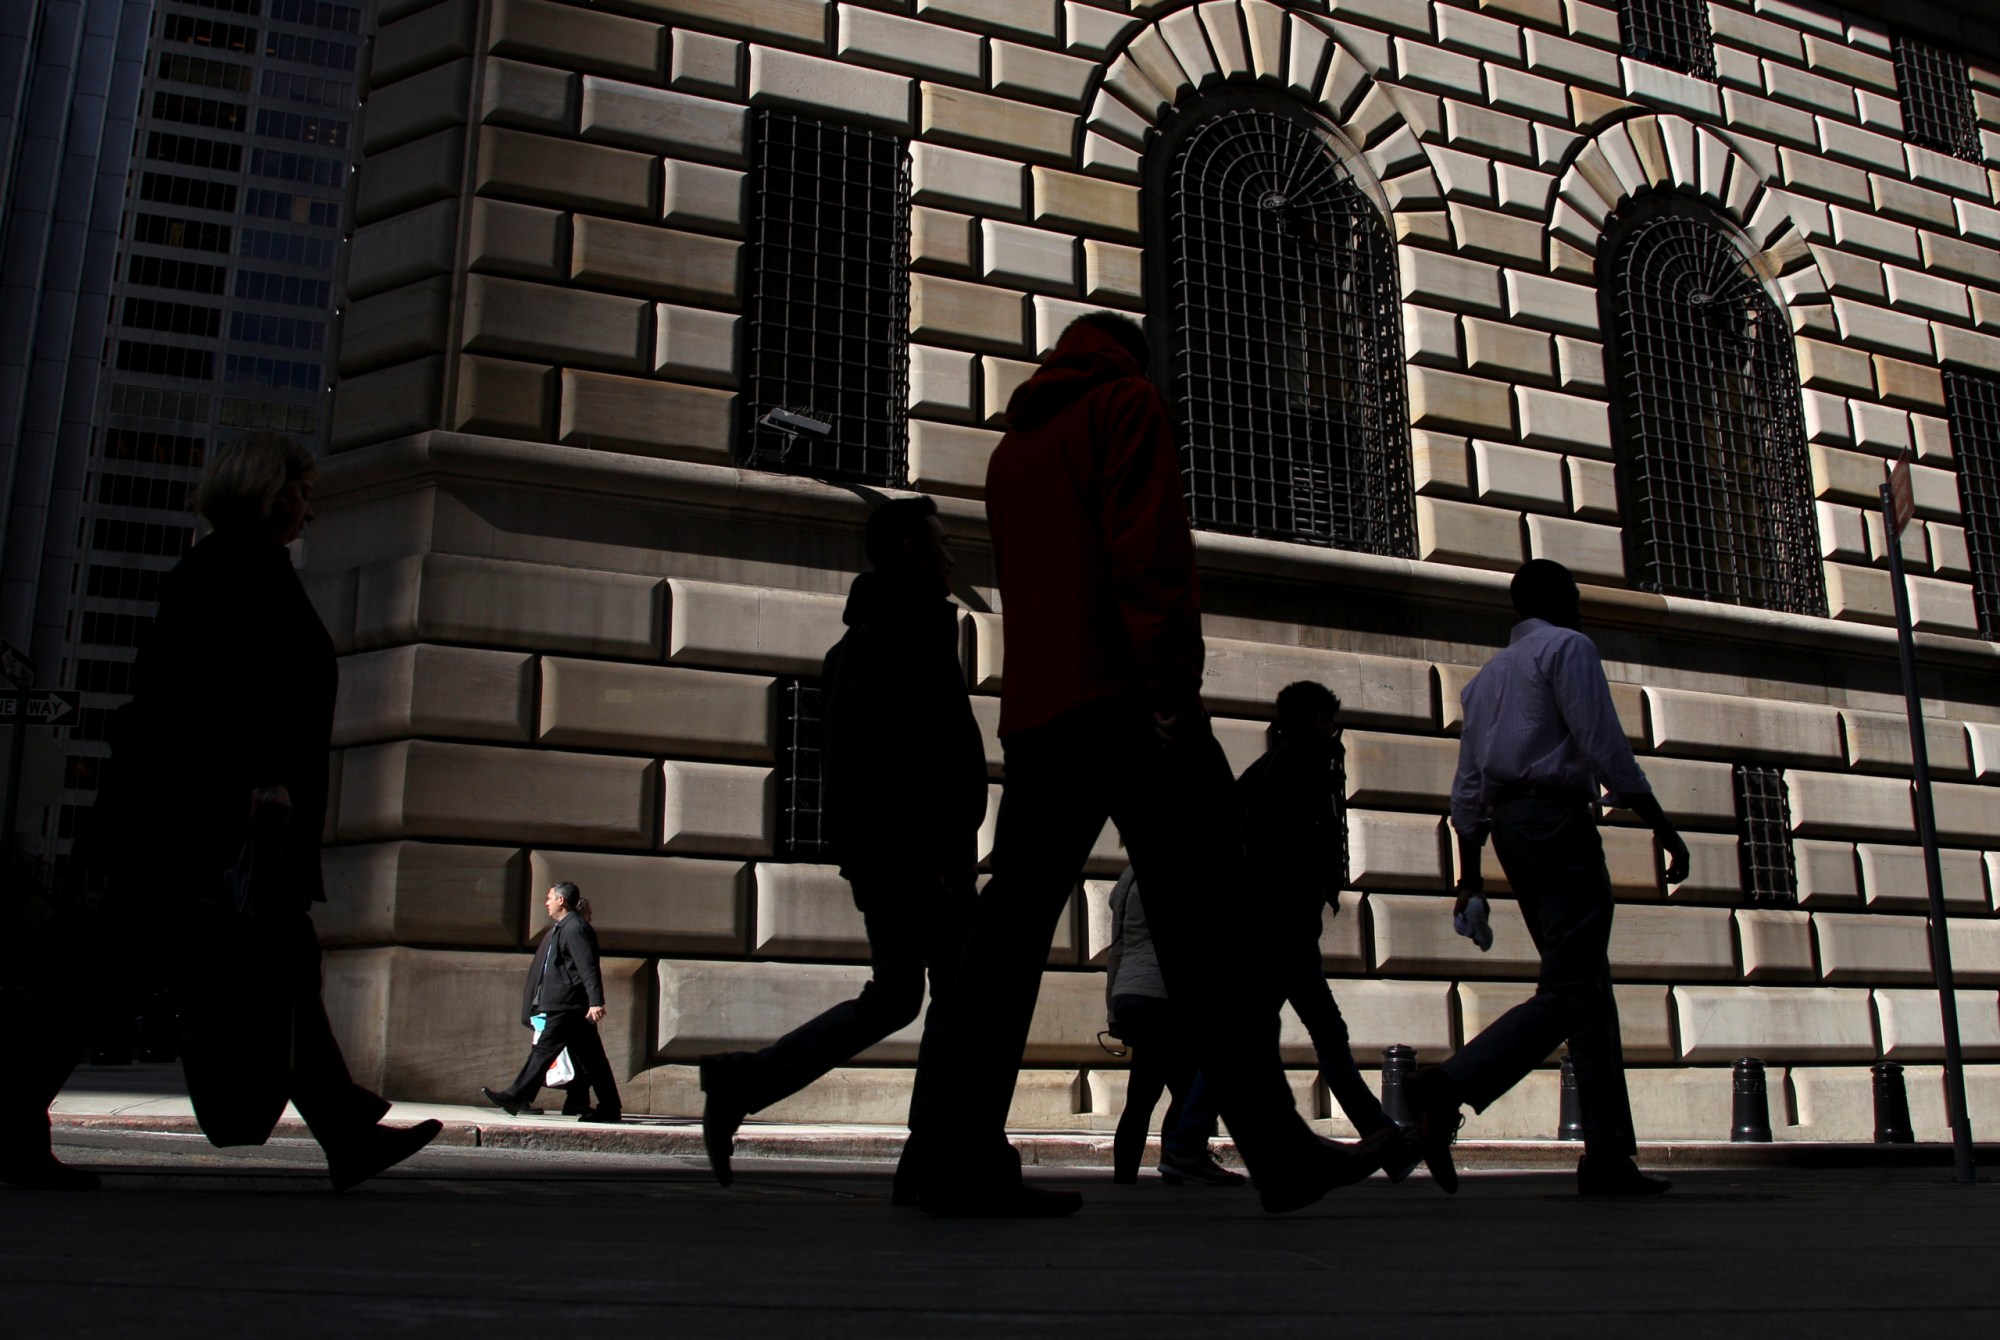 FILE - In this Thursday, Oct. 18, 2012, file photo, pedestrians walk past the Federal Reserve Bank of New York, in New York. On Wednesday, June 15, 2016, the Federal Reserve Bank of New York reports on factory activity in New York in June as indicated by its Empire State manufacturing index. (AP Photo/Seth Wenig, File)